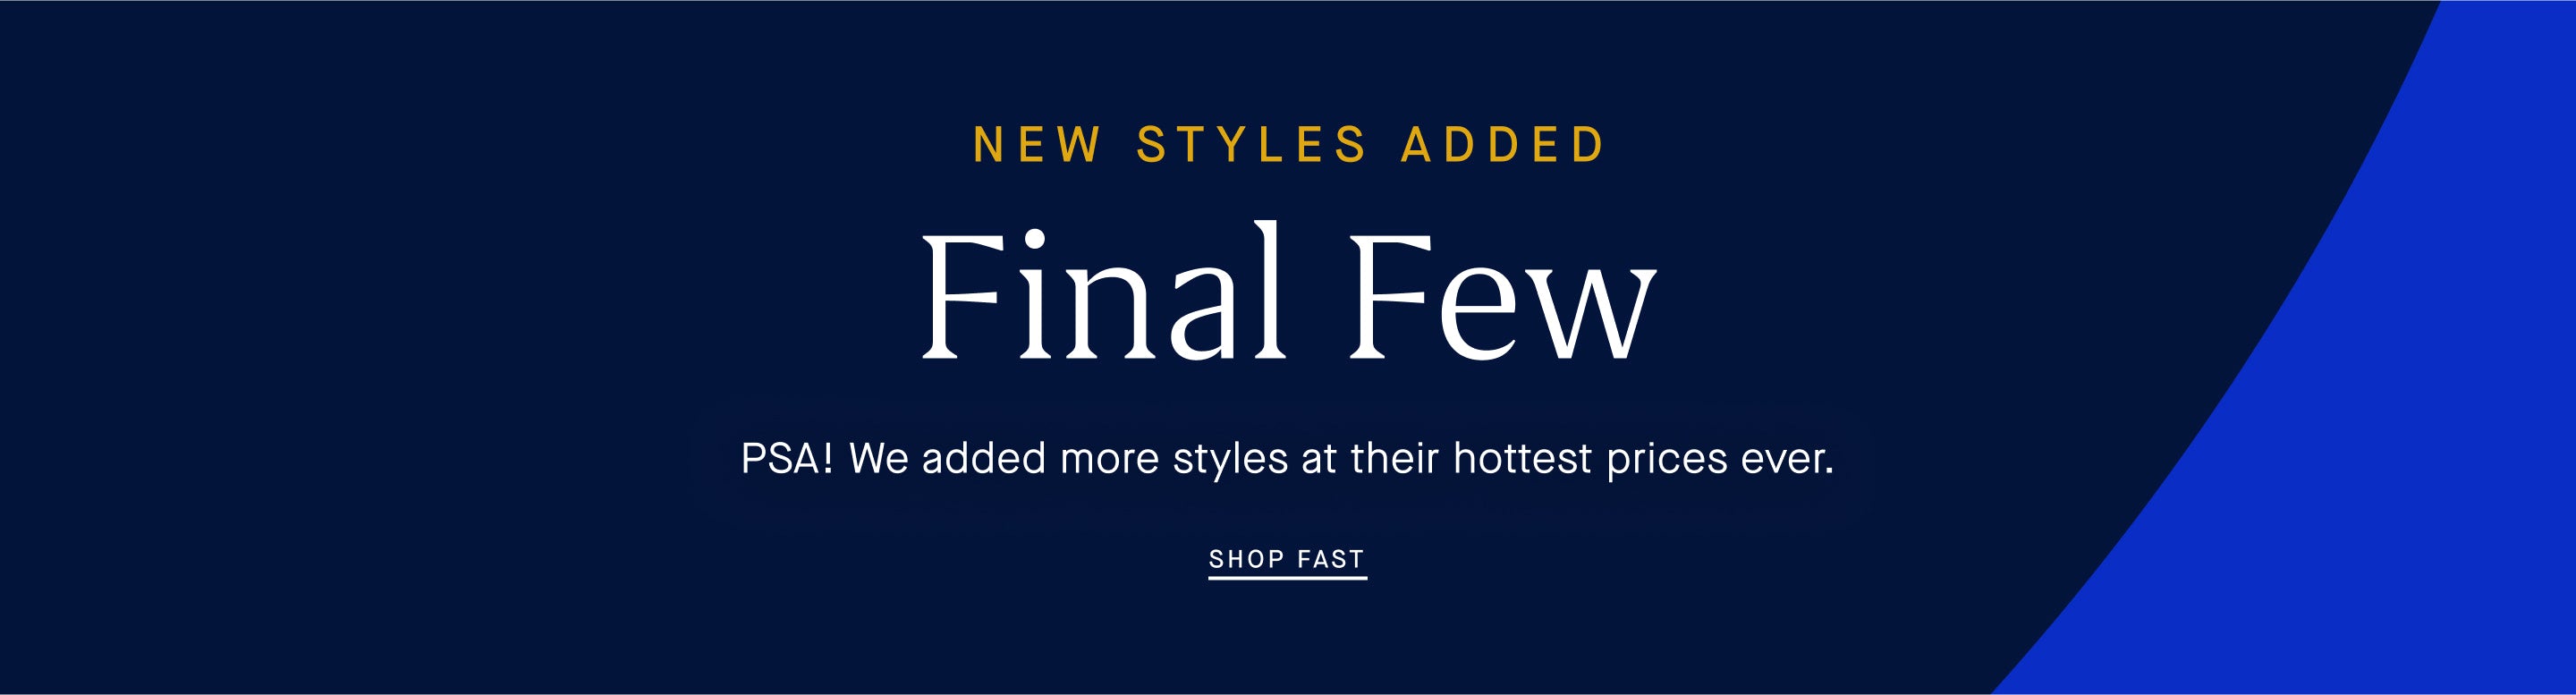 New Styles Added Final Few PSA! We added more styles at their hottest prices ever. Shop Fast